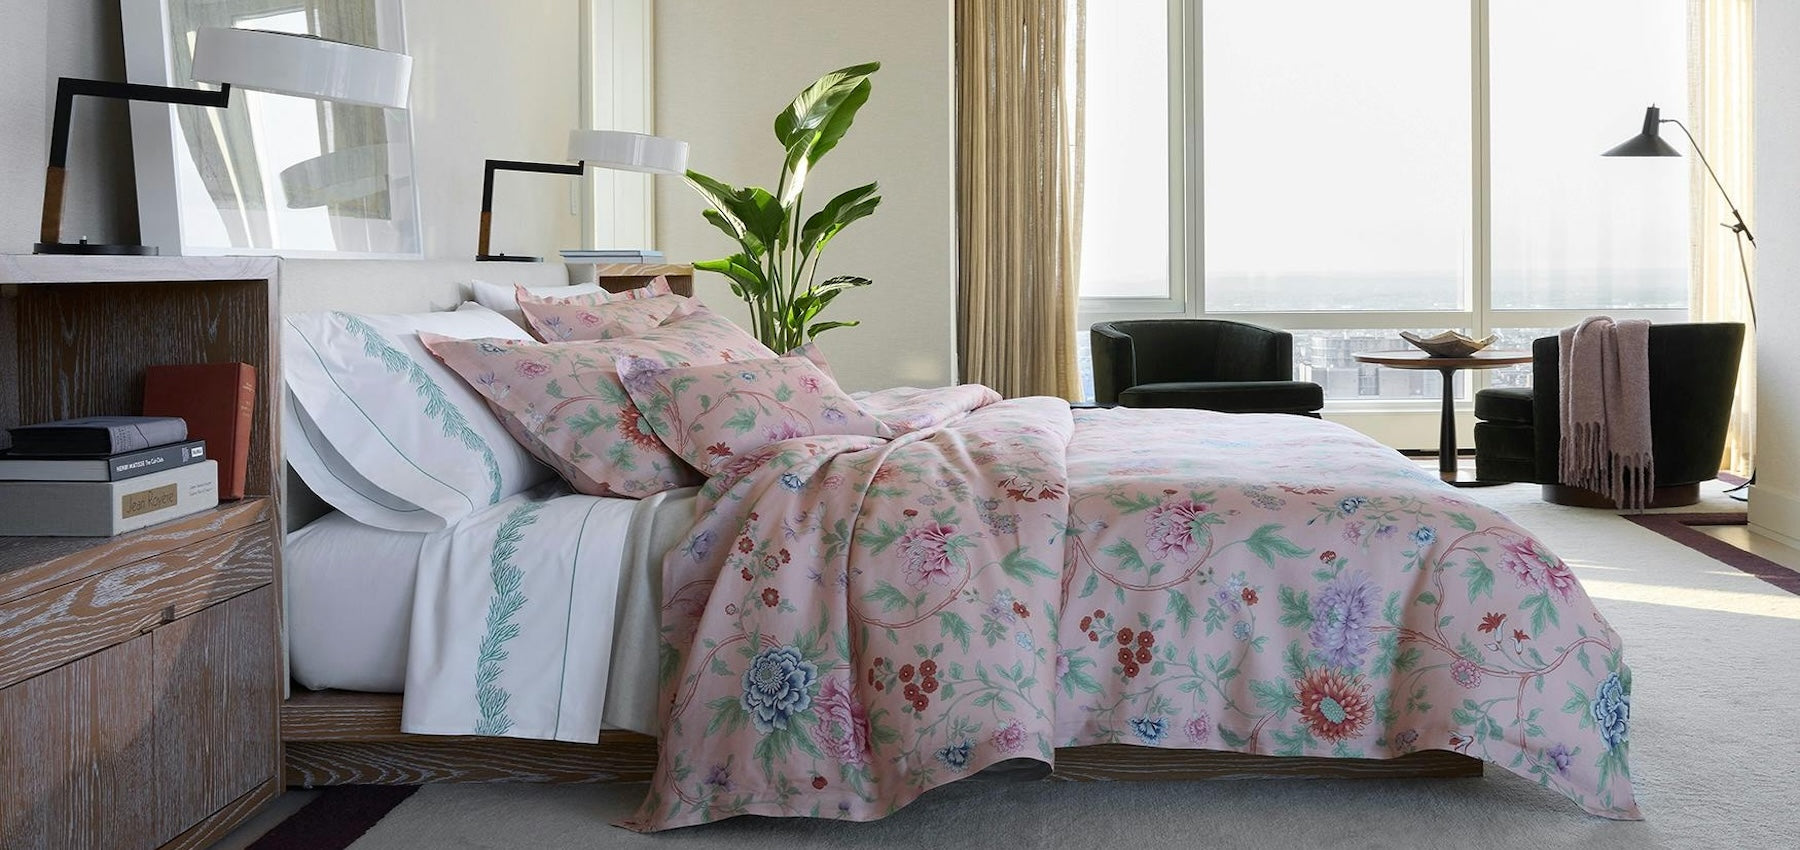 Matouk boutique at Fig Linens and Home - Bedding, Bath and Table Linens - Luxurious Fine Linens for your Home